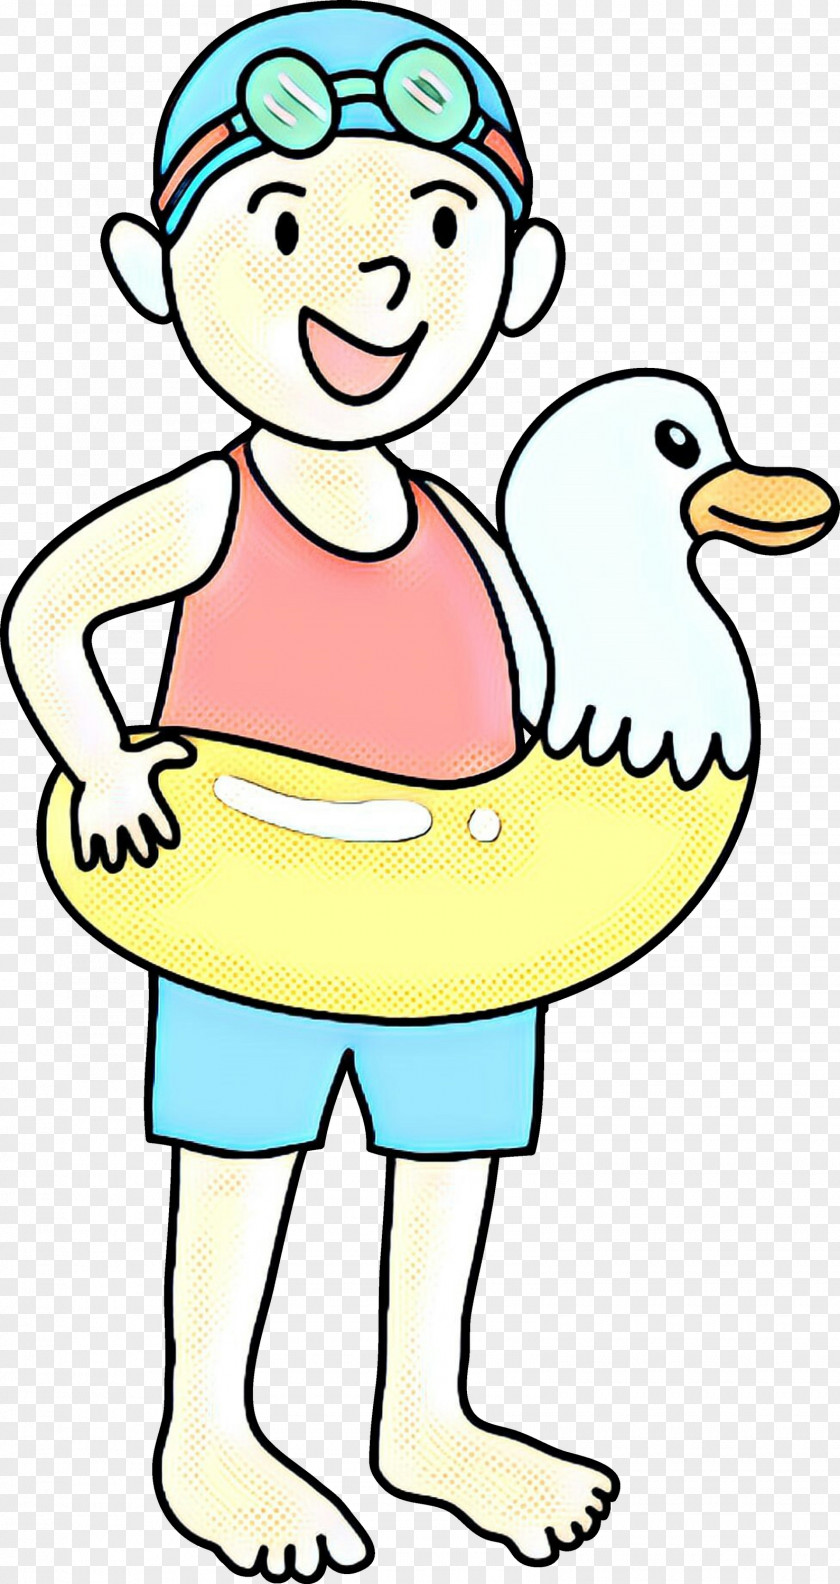 Child Ducks Geese And Swans Bird Line Art PNG